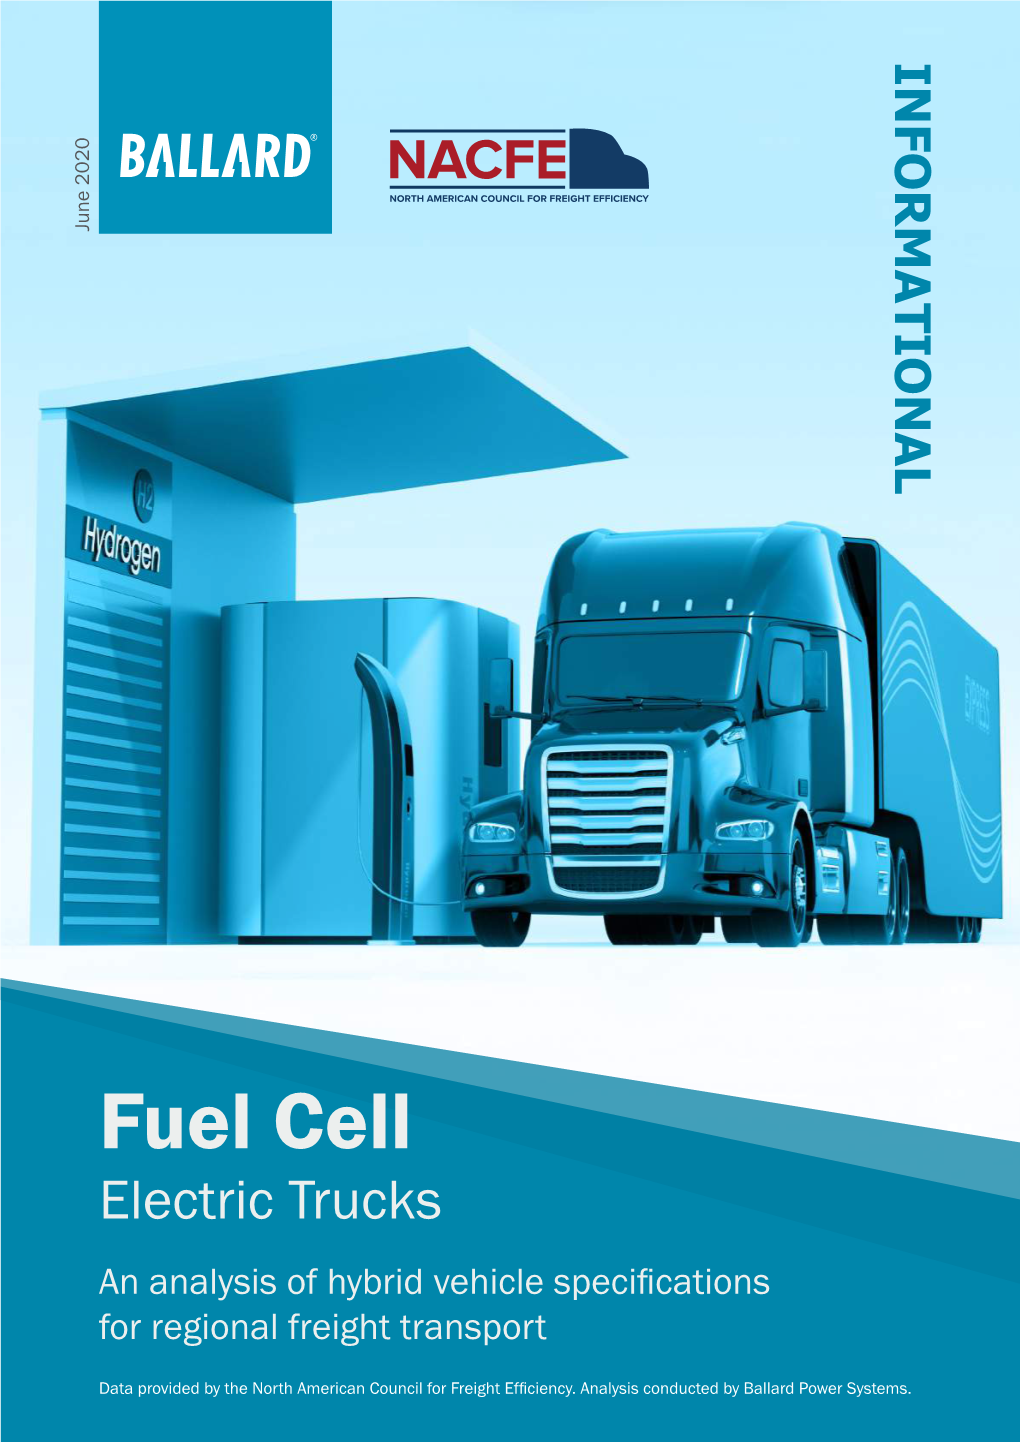 Fuel Cell Electric Trucks: an Analysis of Hybrid Vehicle Specifications for Regional Freight Transport